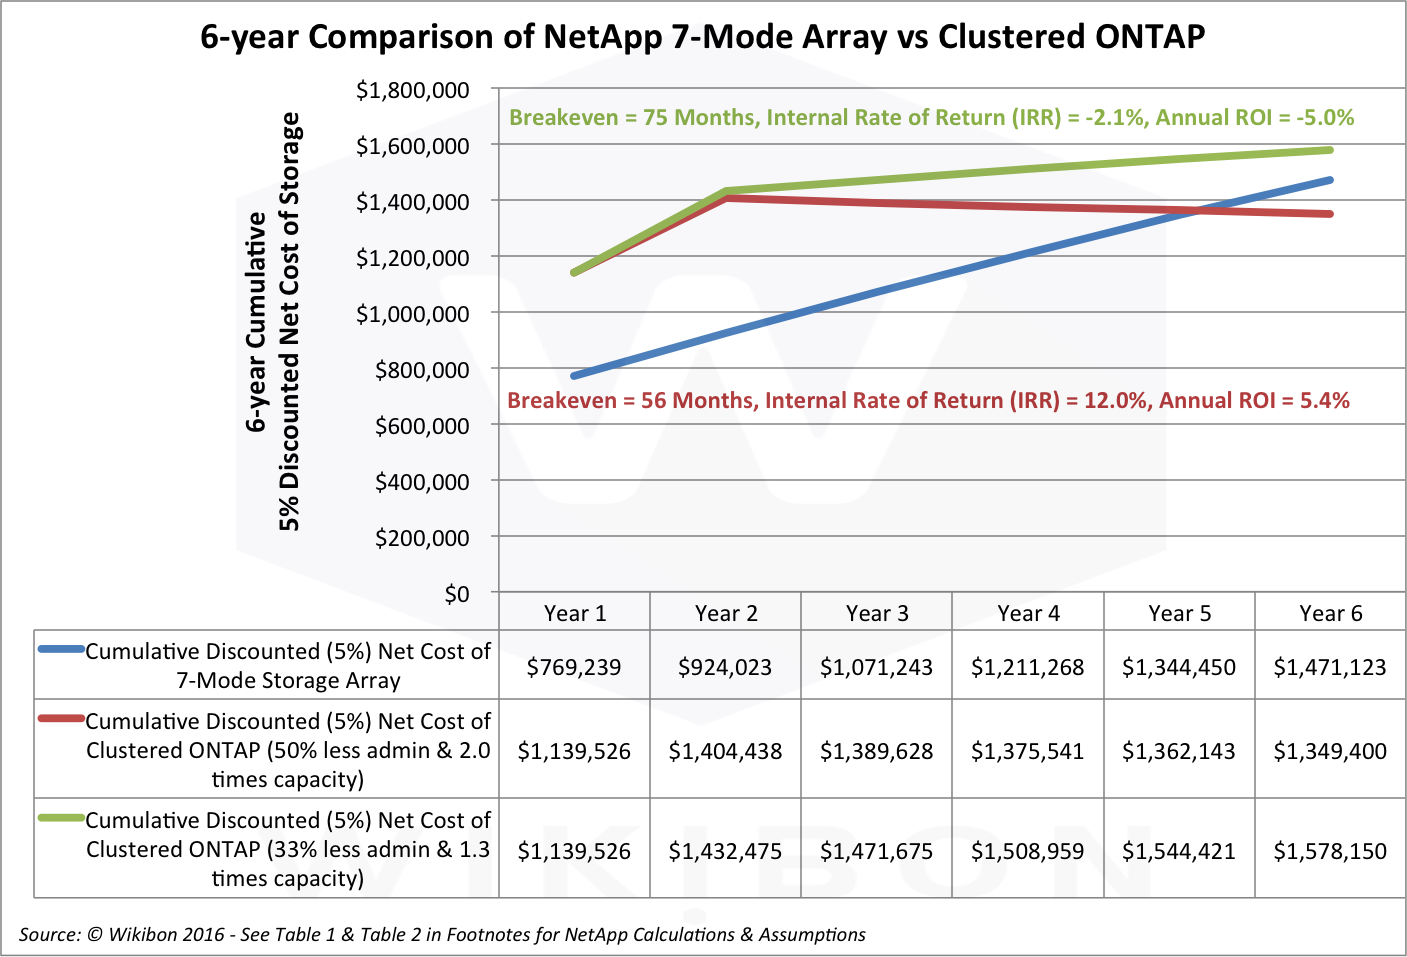 Figure 1: 6-year Comparison of NetApp 7-Mode vs. Clustered ONTAP with High & Lower Levels of Benefit Source: © Wikibon 2016See Table 1 and Table 2 in the Footnotes below for detailed assumptions and calculations